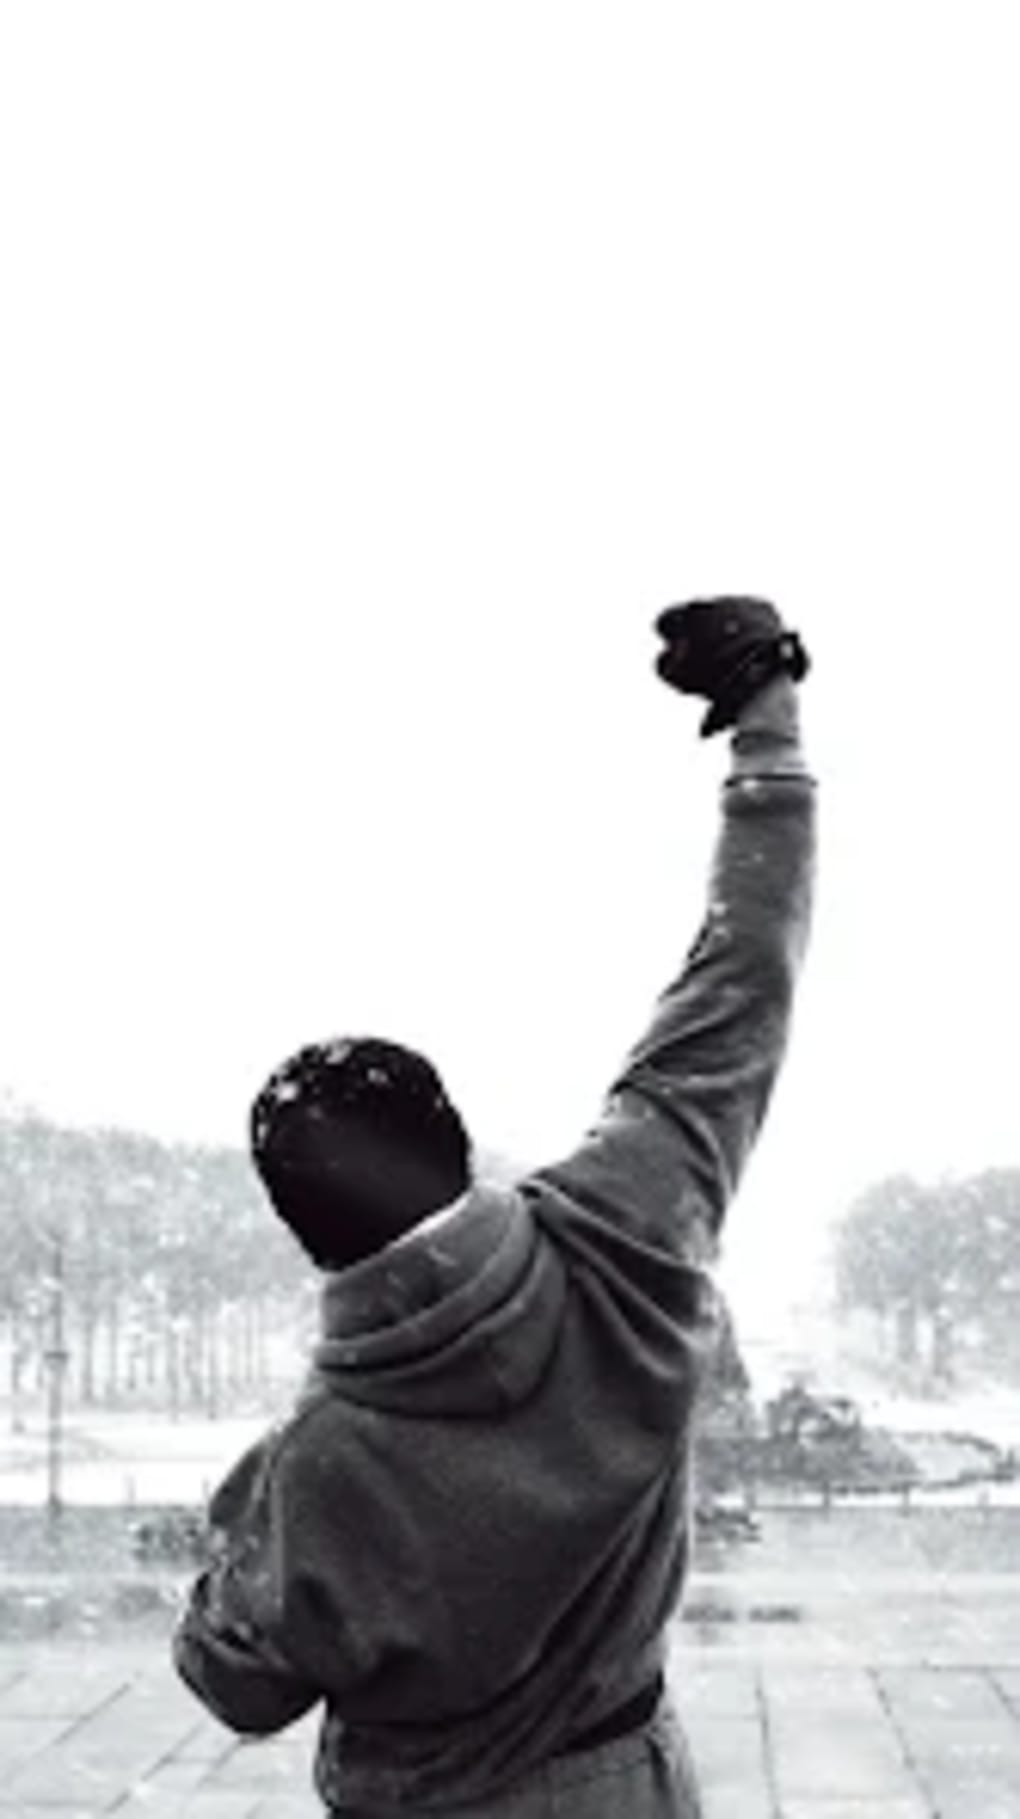 Rocky balboa wallpaper for Android - Download